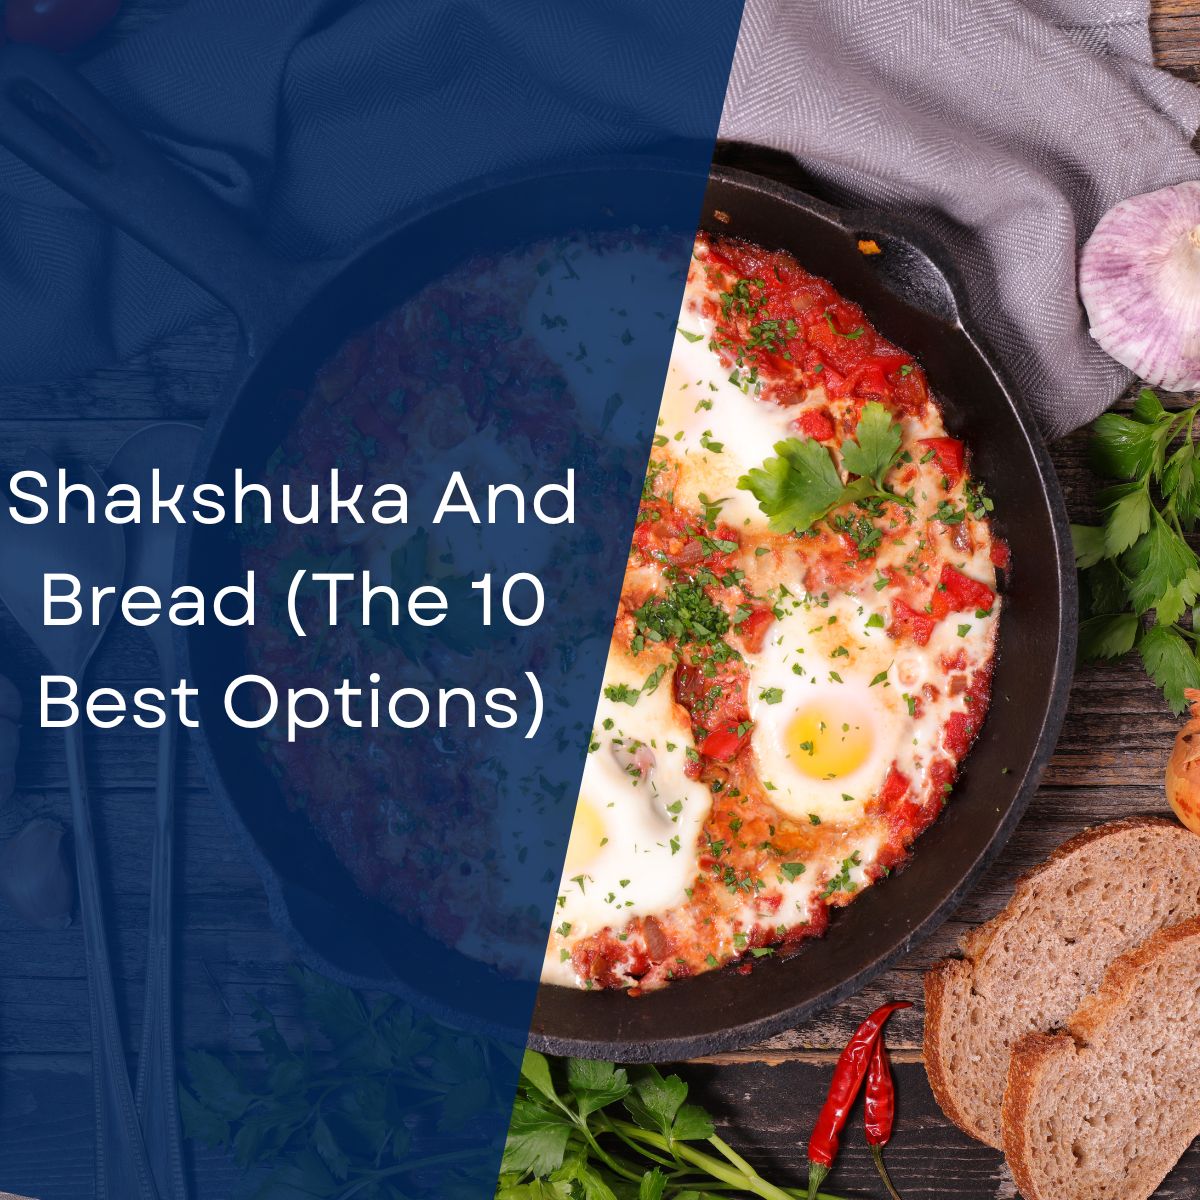 Shakshuka And Bread (The 10 Best Options)